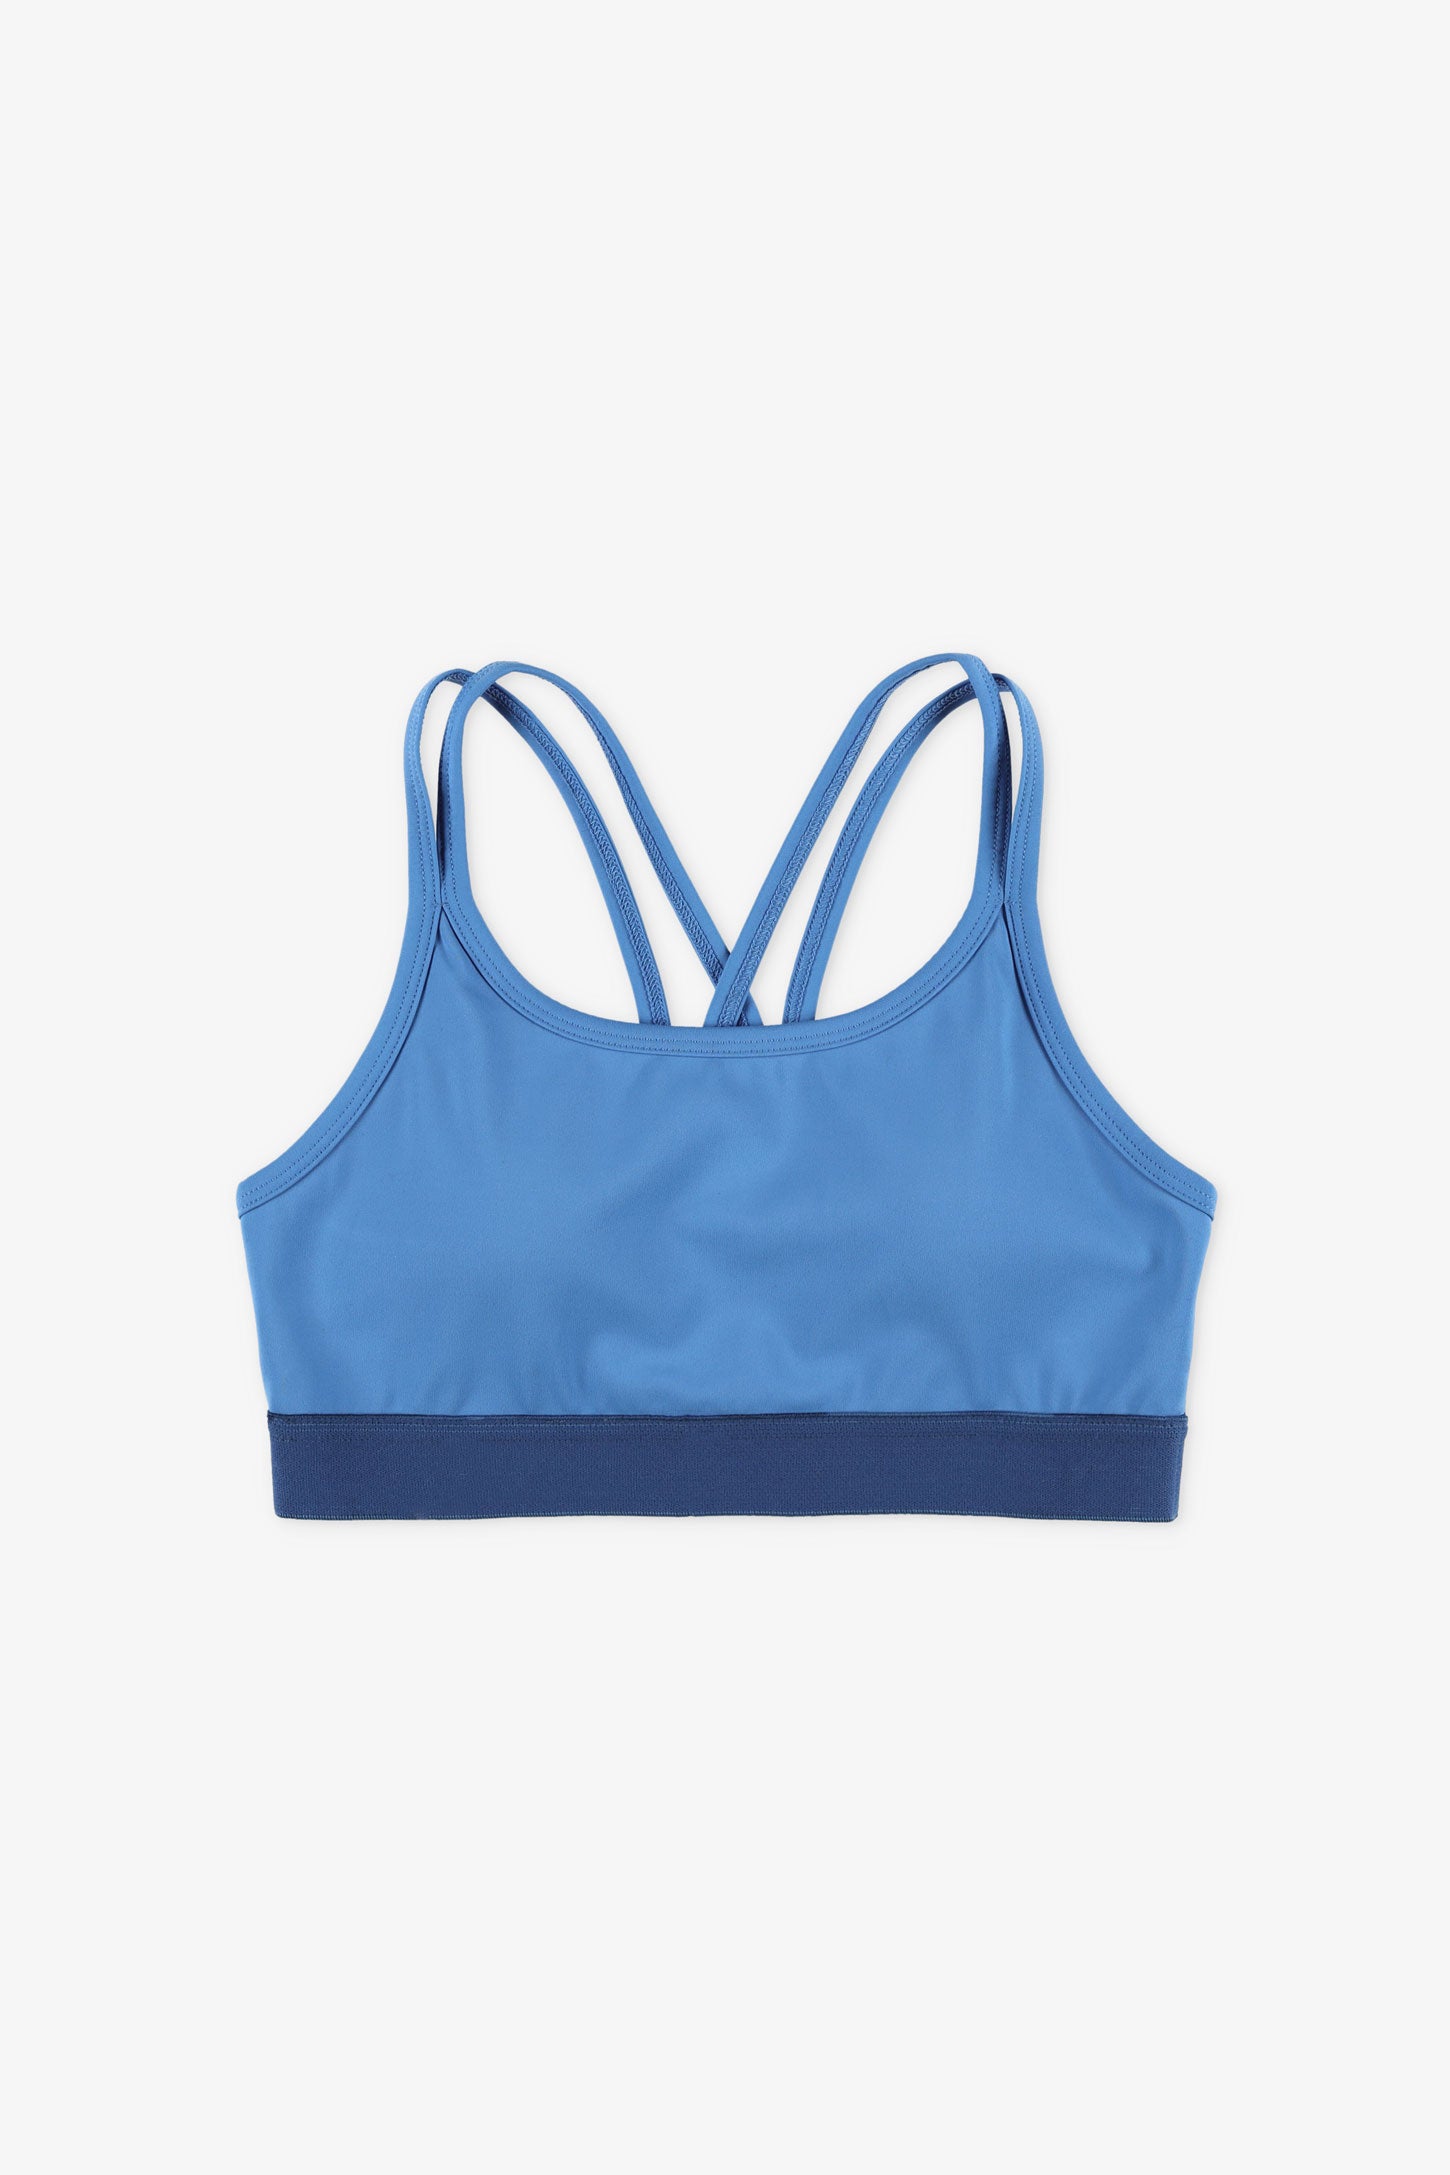 Athletic bra with crossed back straps - Teenage girl